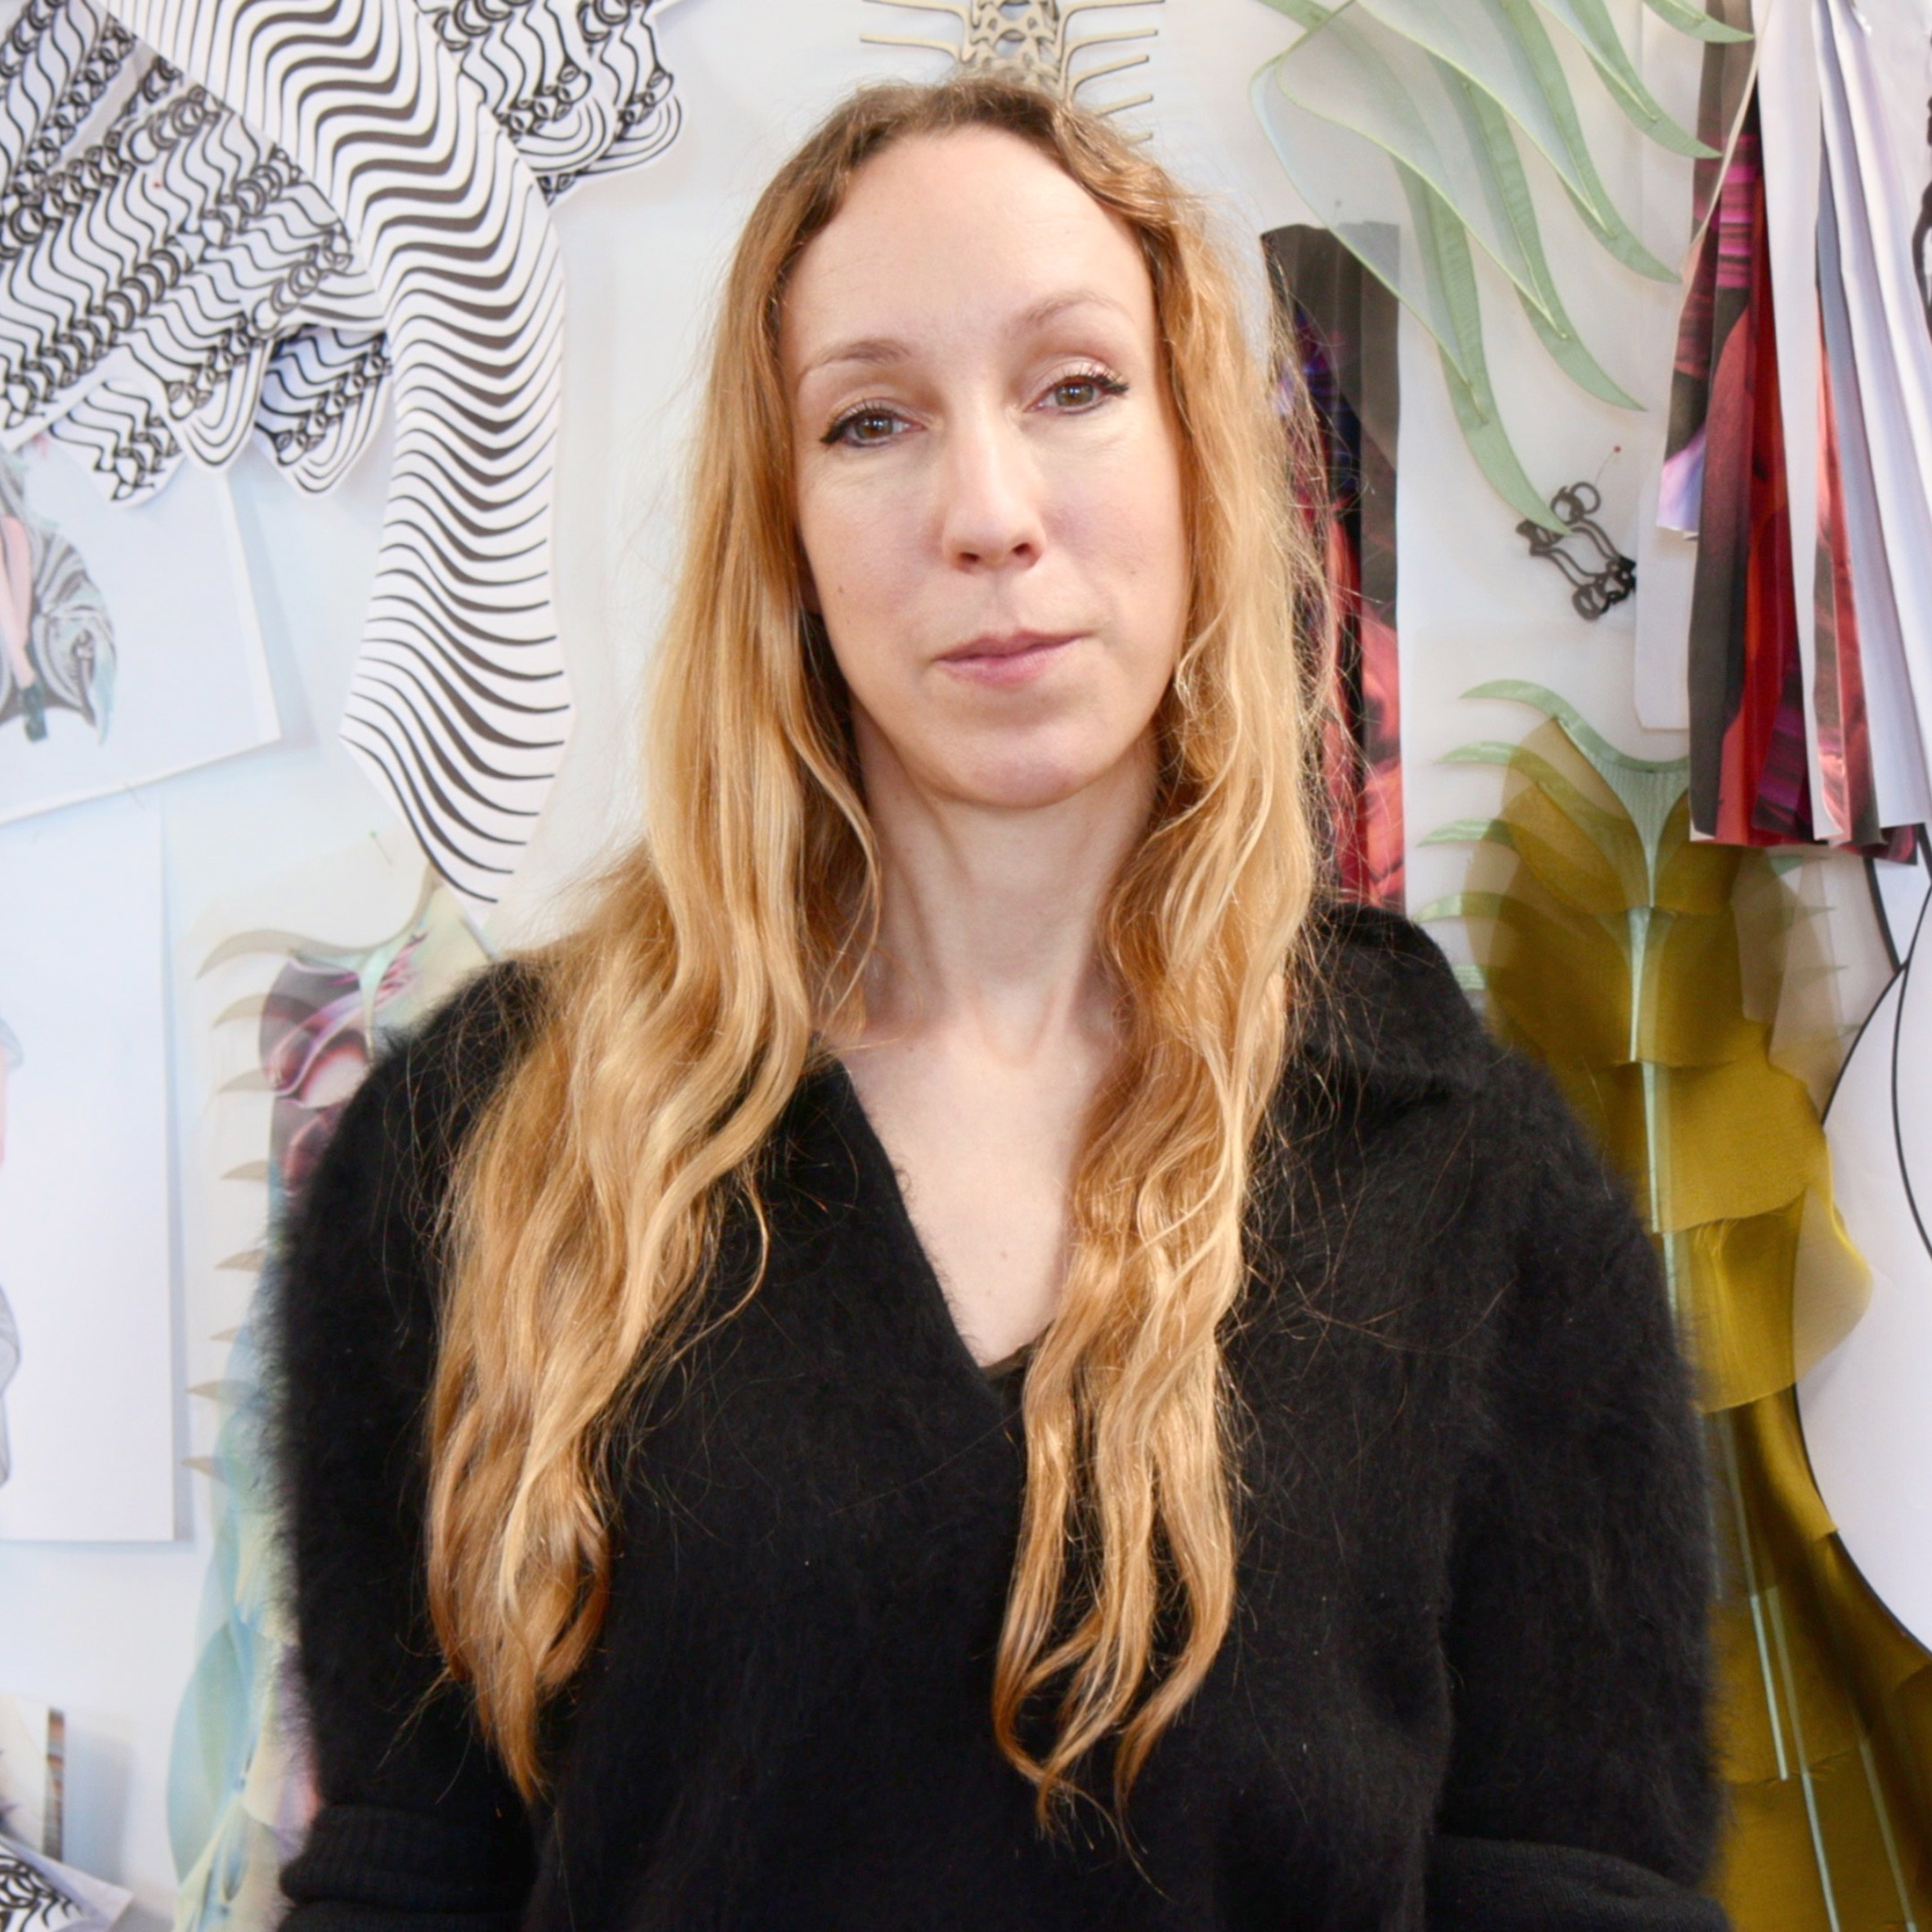 Architectural knowledge is "very useful for material development" in fashion says Iris van Herpen